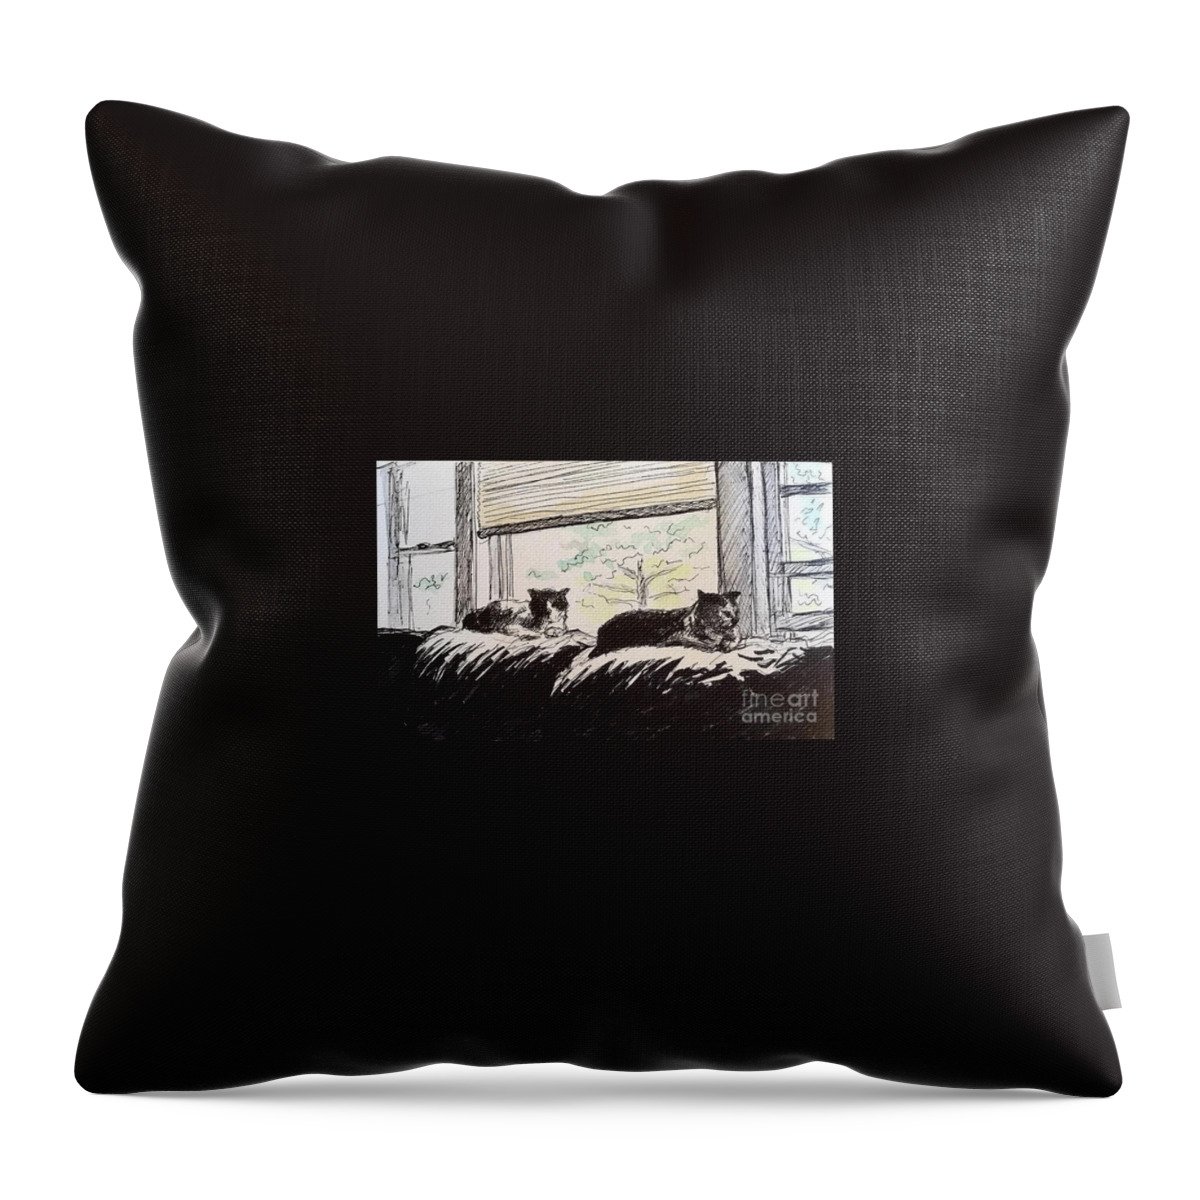 Cat Throw Pillow featuring the painting Cats by the Window - Nekozanmai by Yoshiko Mishina